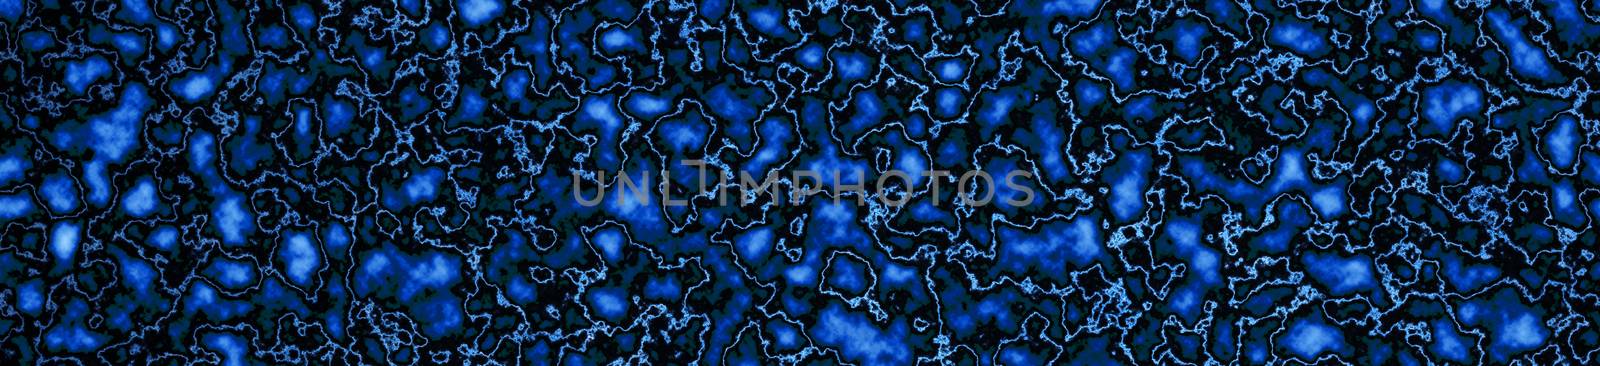 panorama sapphire abstract line art marble pattern texture luxur by Darkfox